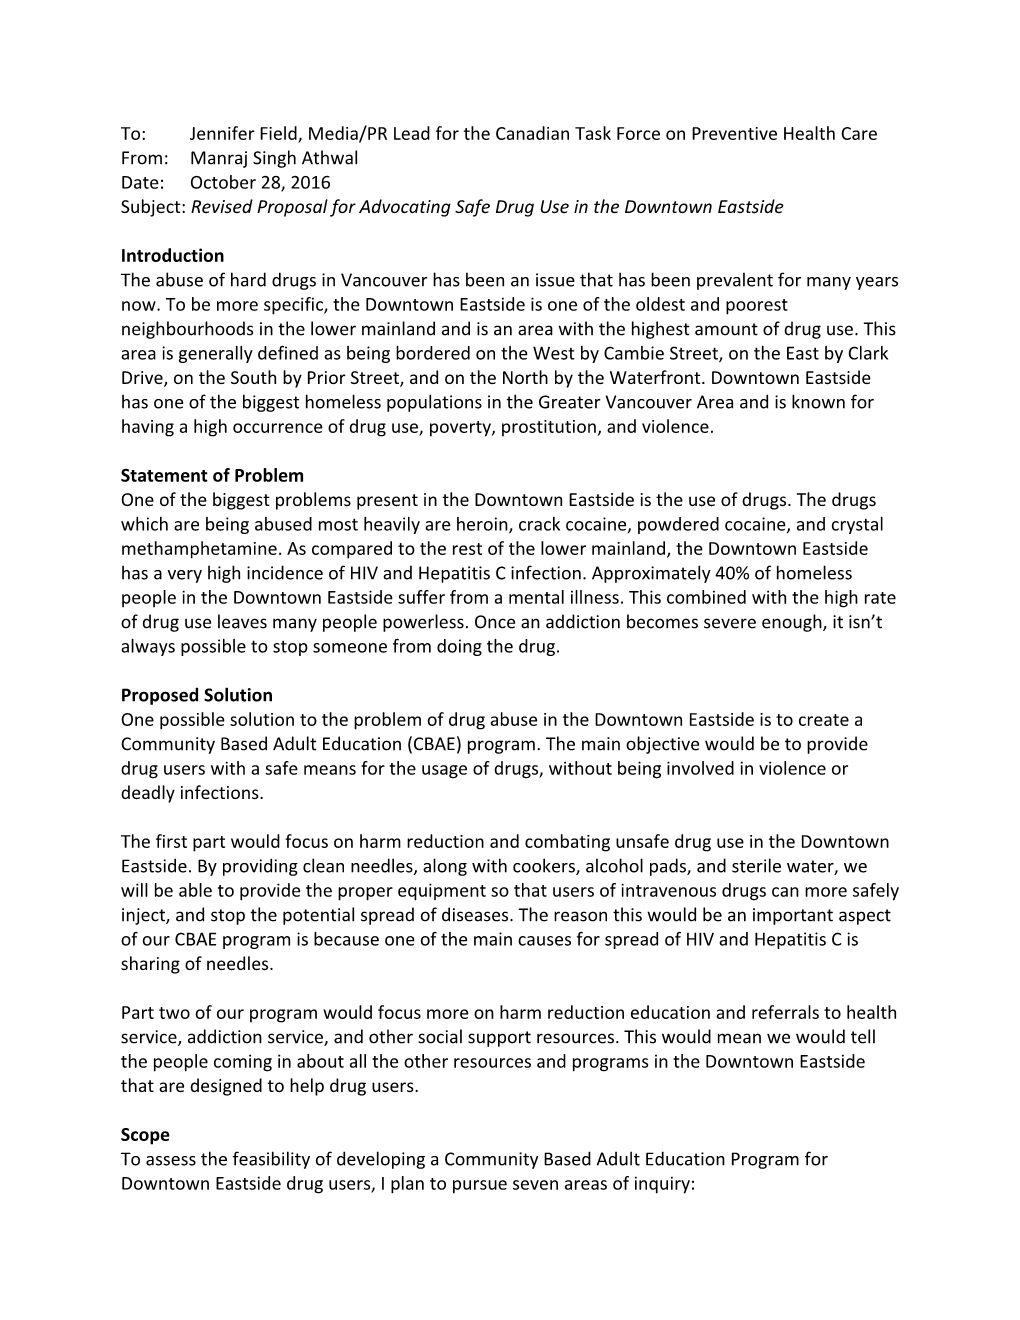 Subject: Revised Proposal for Advocating Safe Drug Use in the Downtown Eastside